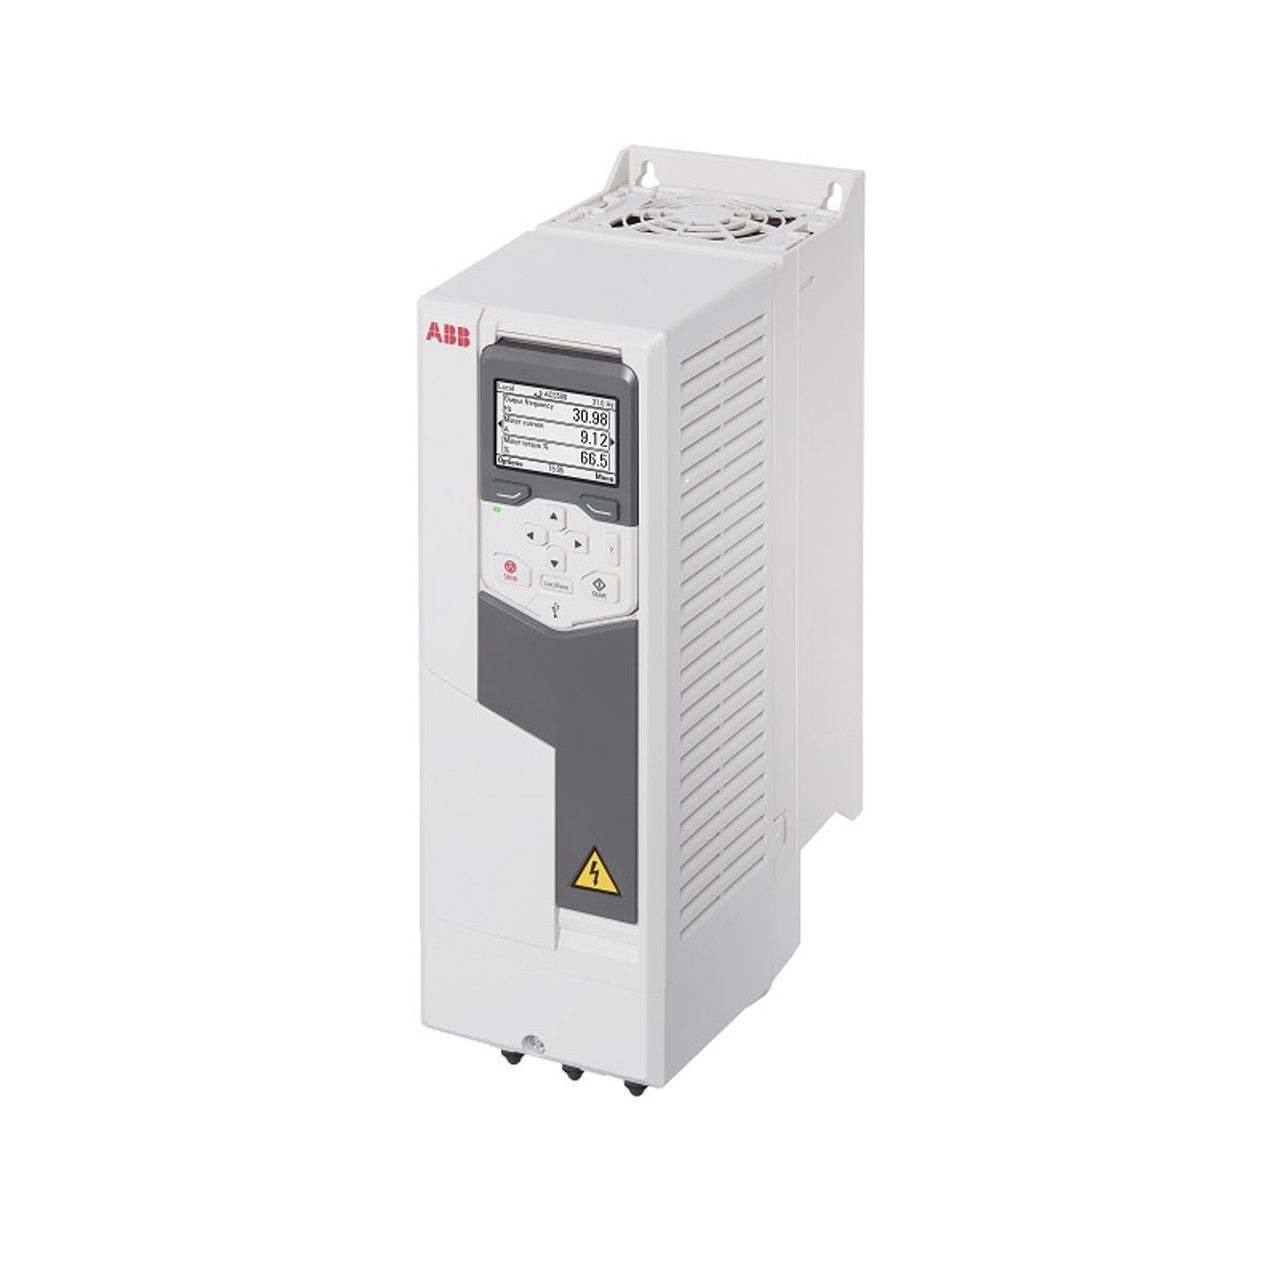 1.5kW low overload IP21 3 phase 480v 4.8A HVAC Variable Speed Drive 